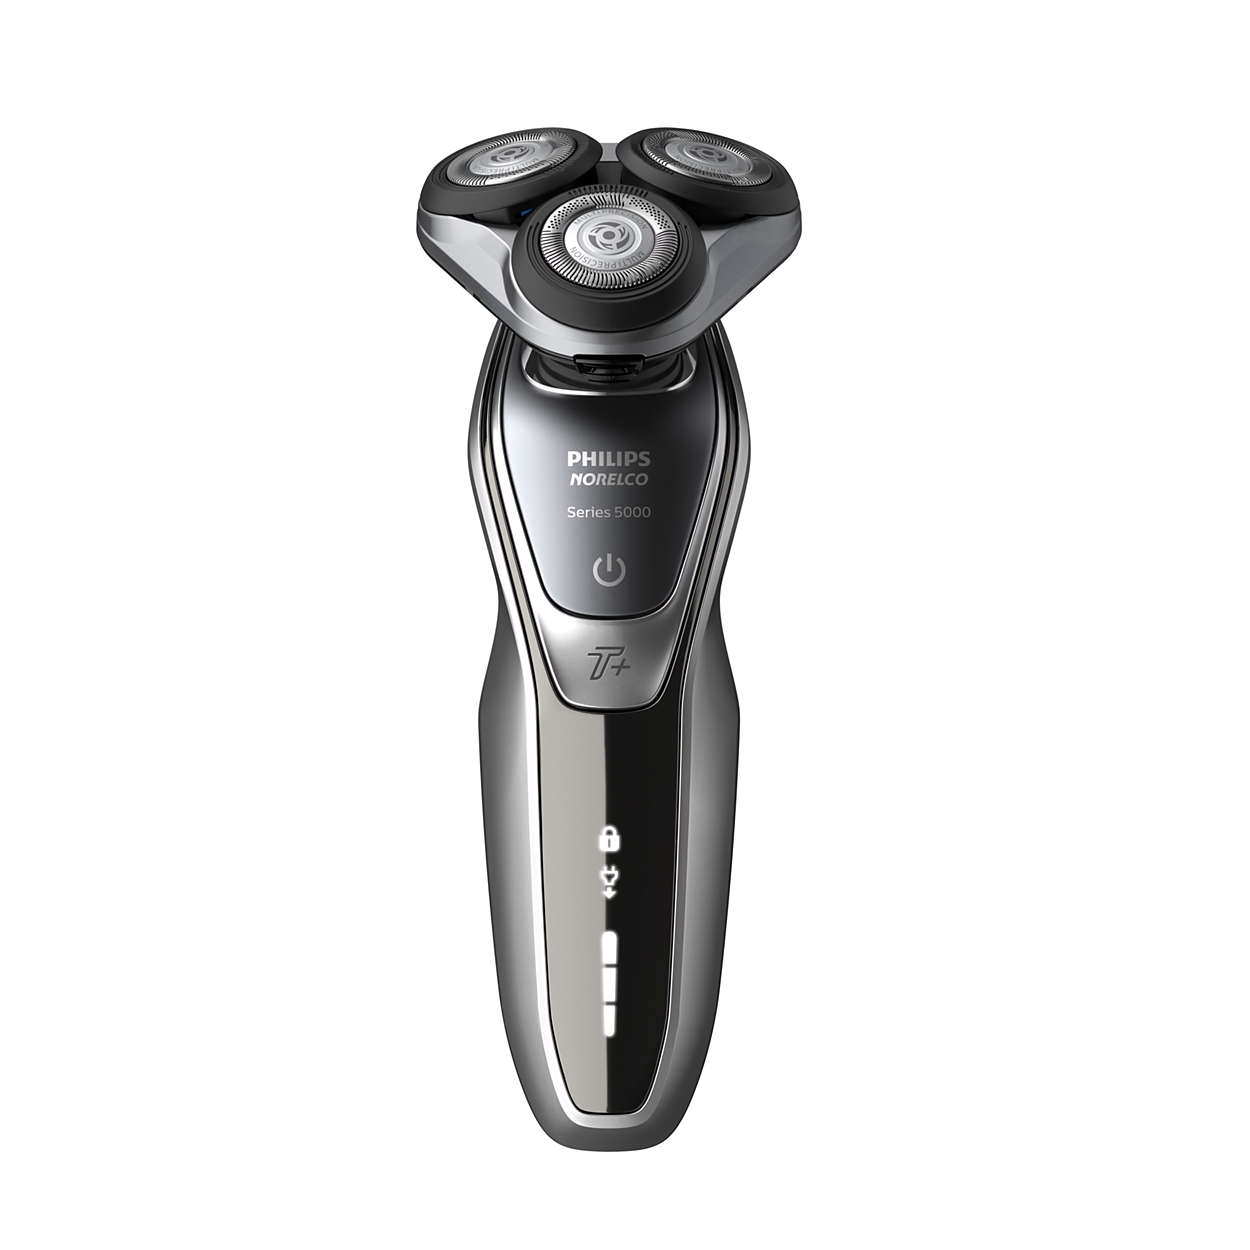 Philips series 5000 цены. Philips Norelco 5000 Series. Philips Series 5000. Philips Norelco 6500. Shaver Charging Stand.